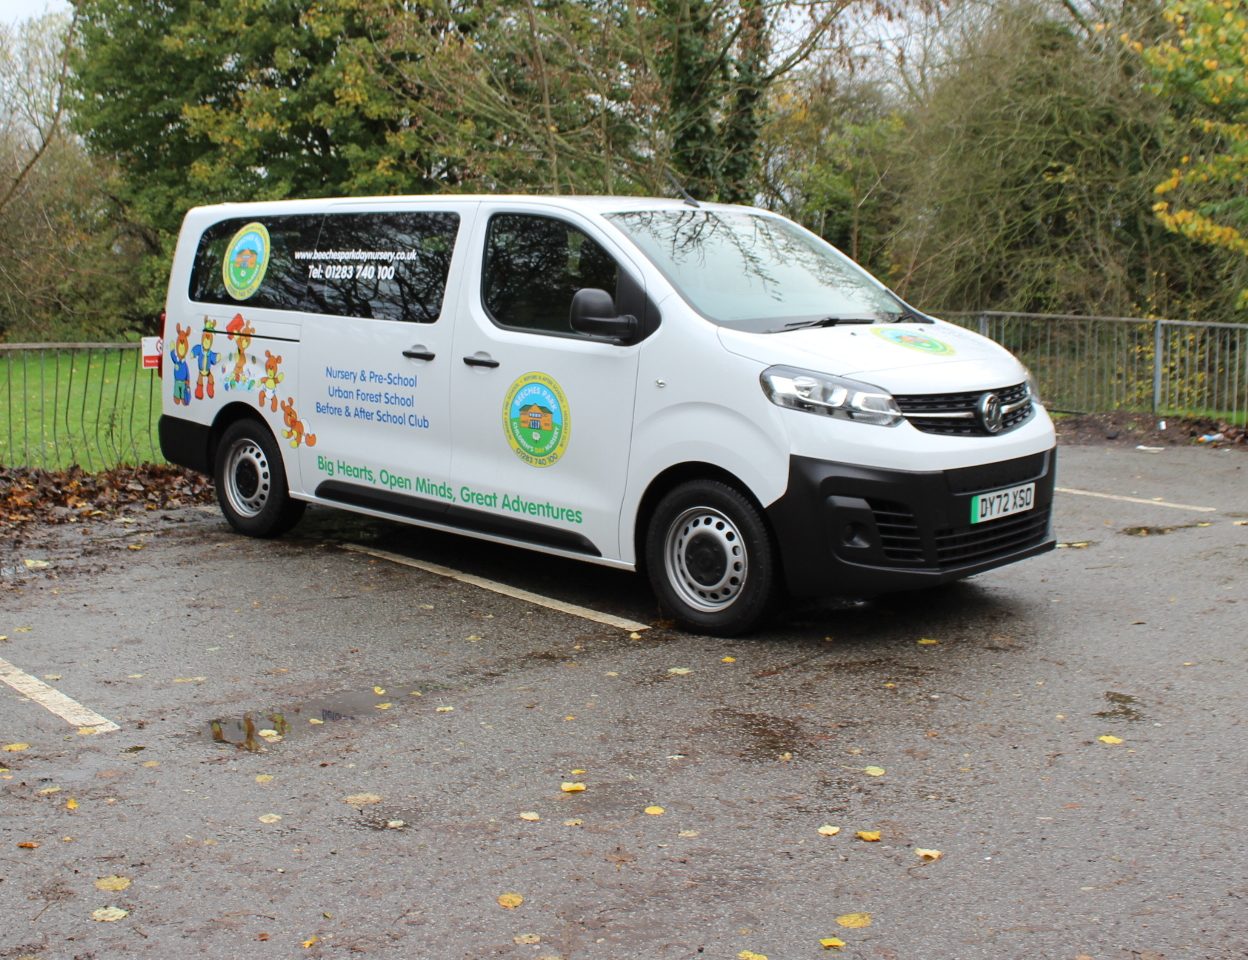 Our new electric minibus has arrived